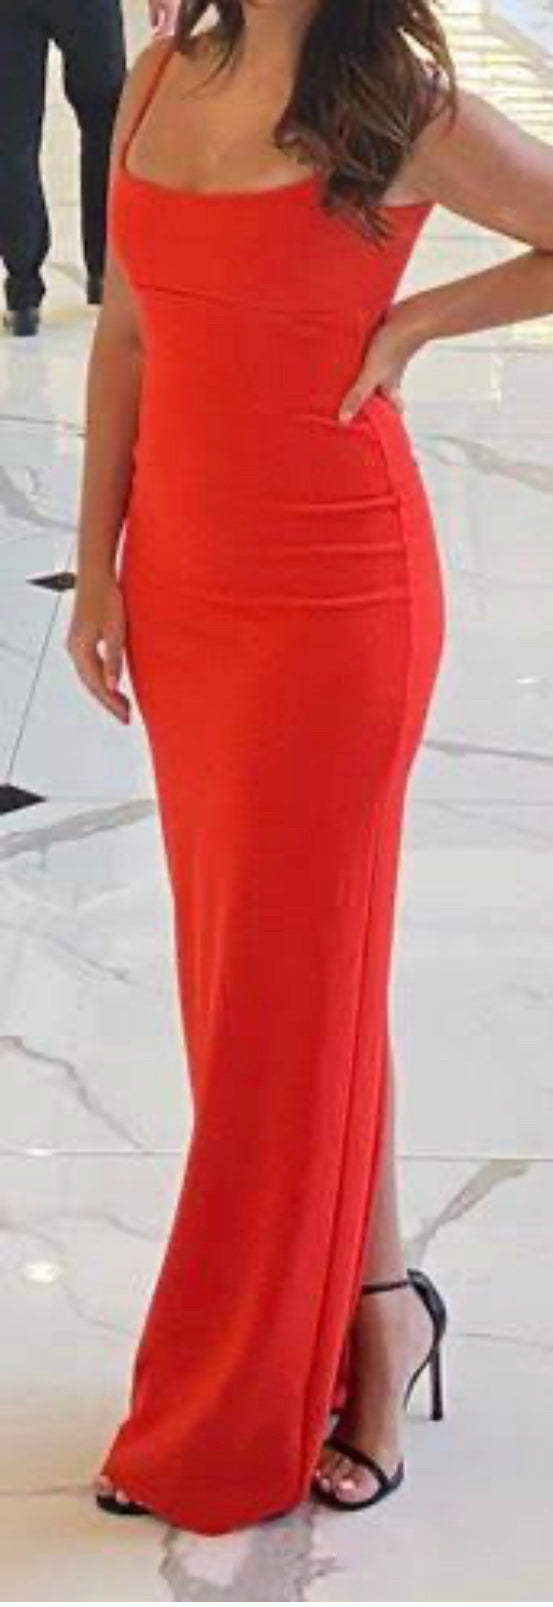 Nookie Bailey Cherry red maxi ball dress, available to rent in Auckland, NZ